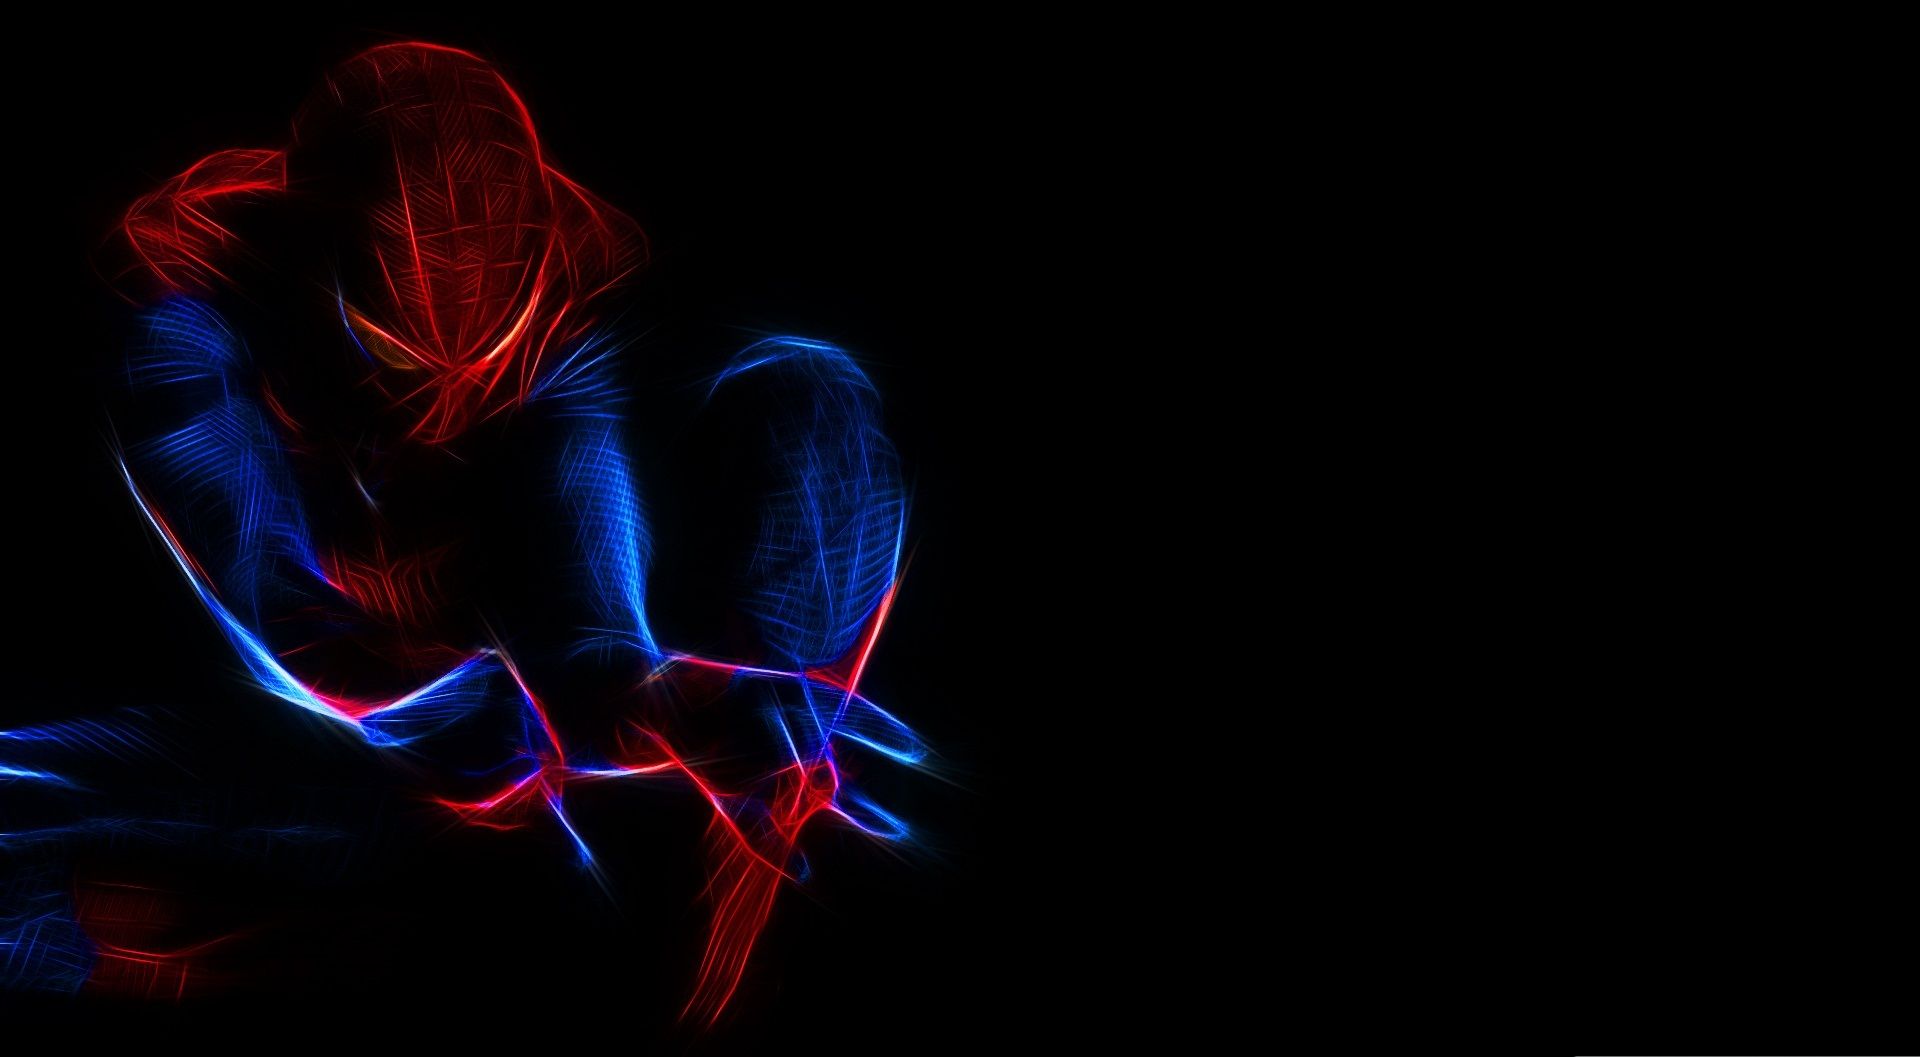 top 10 wallpaper download,red,blue,light,darkness,electric blue